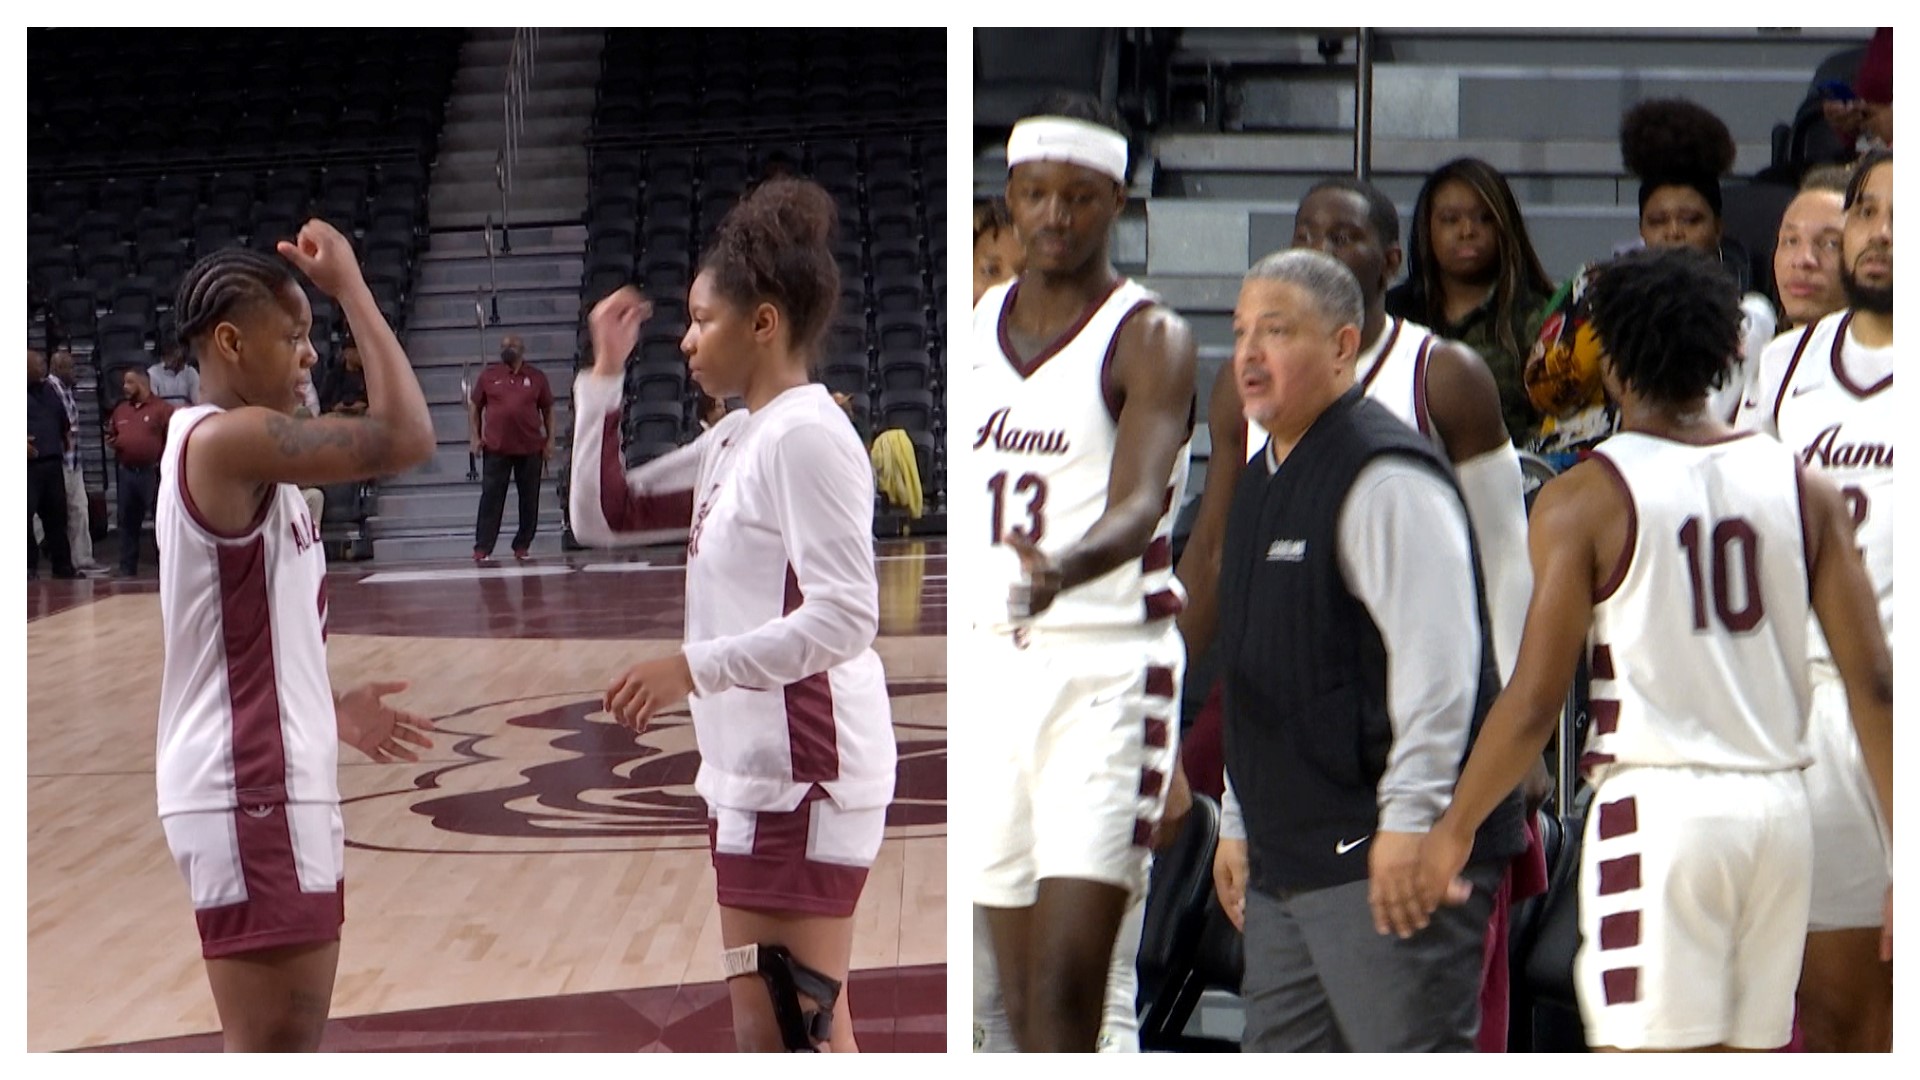 The Alabama A&M Bulldogs and Lady Bulldogs defended the home floor in their SWAC opener against Arkansas-Pine Bluff.